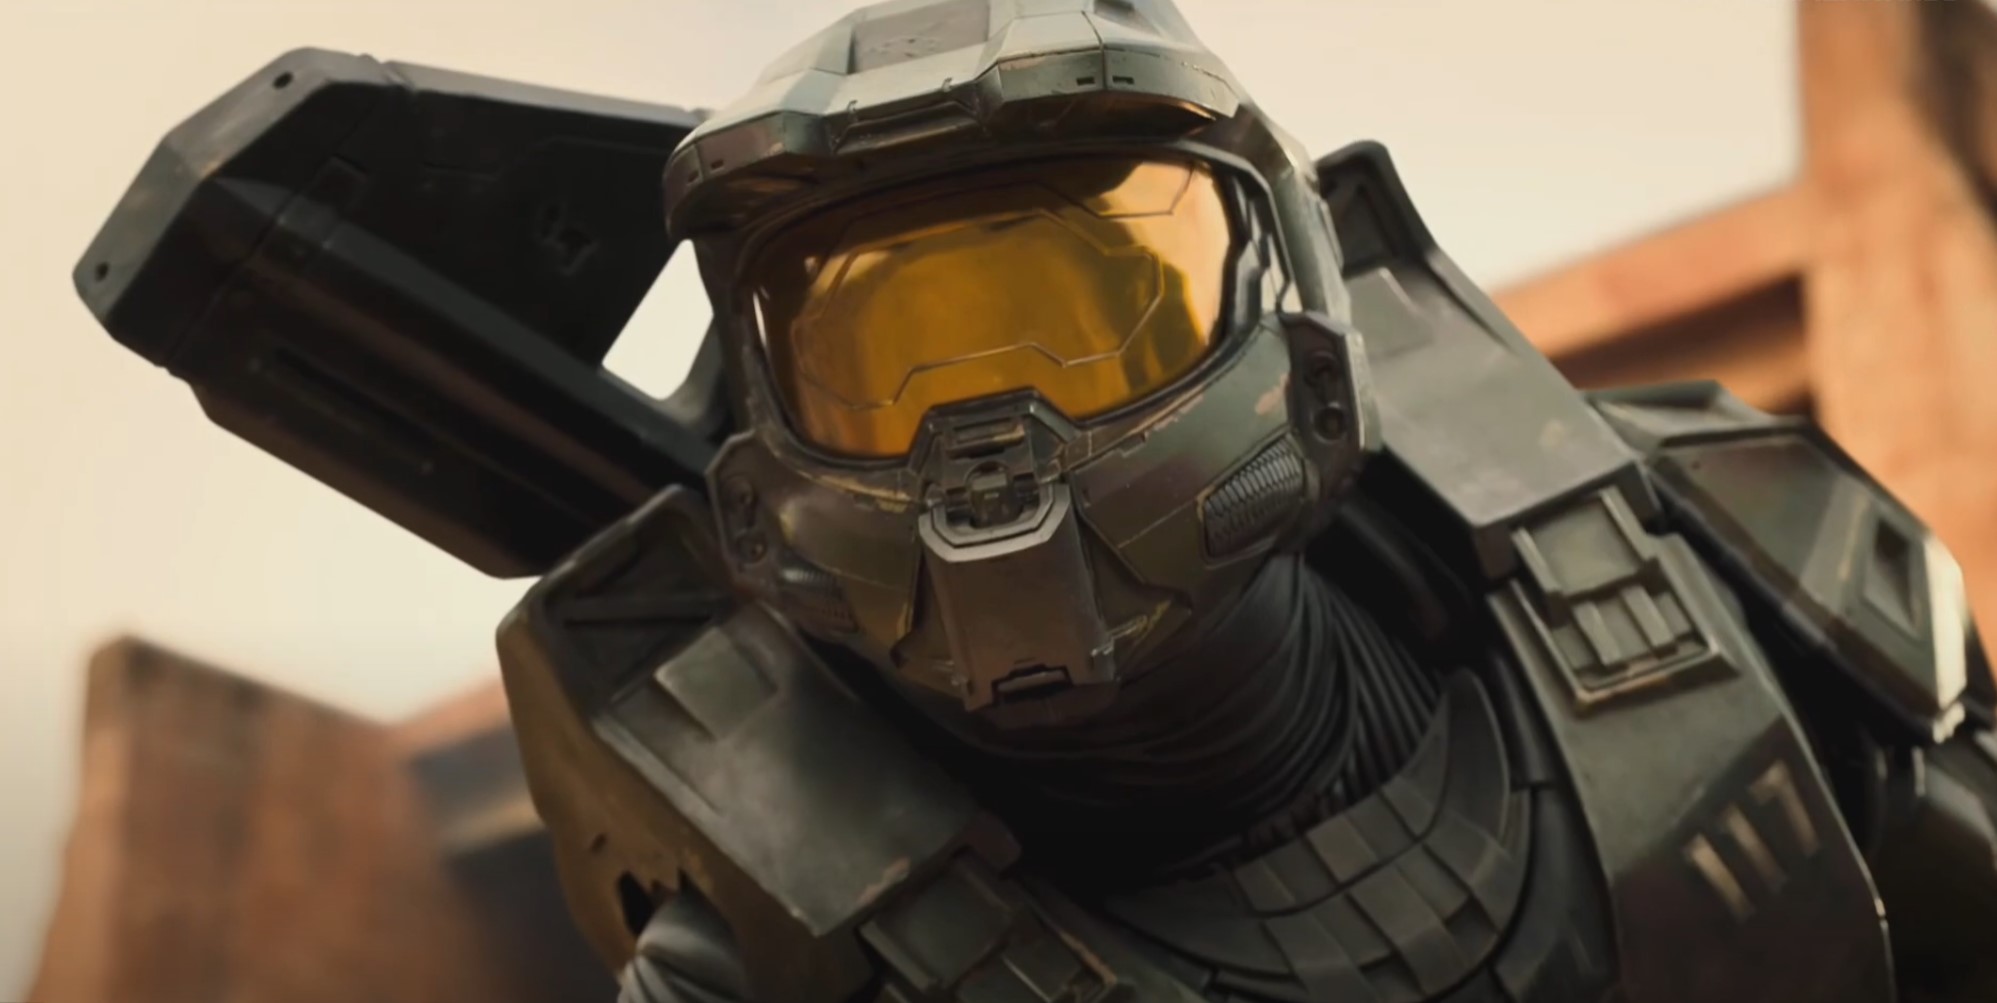 Halo The Series Trailer Reveals March Premiere Date, First Look At Cortana  And Covenant - Game Informer